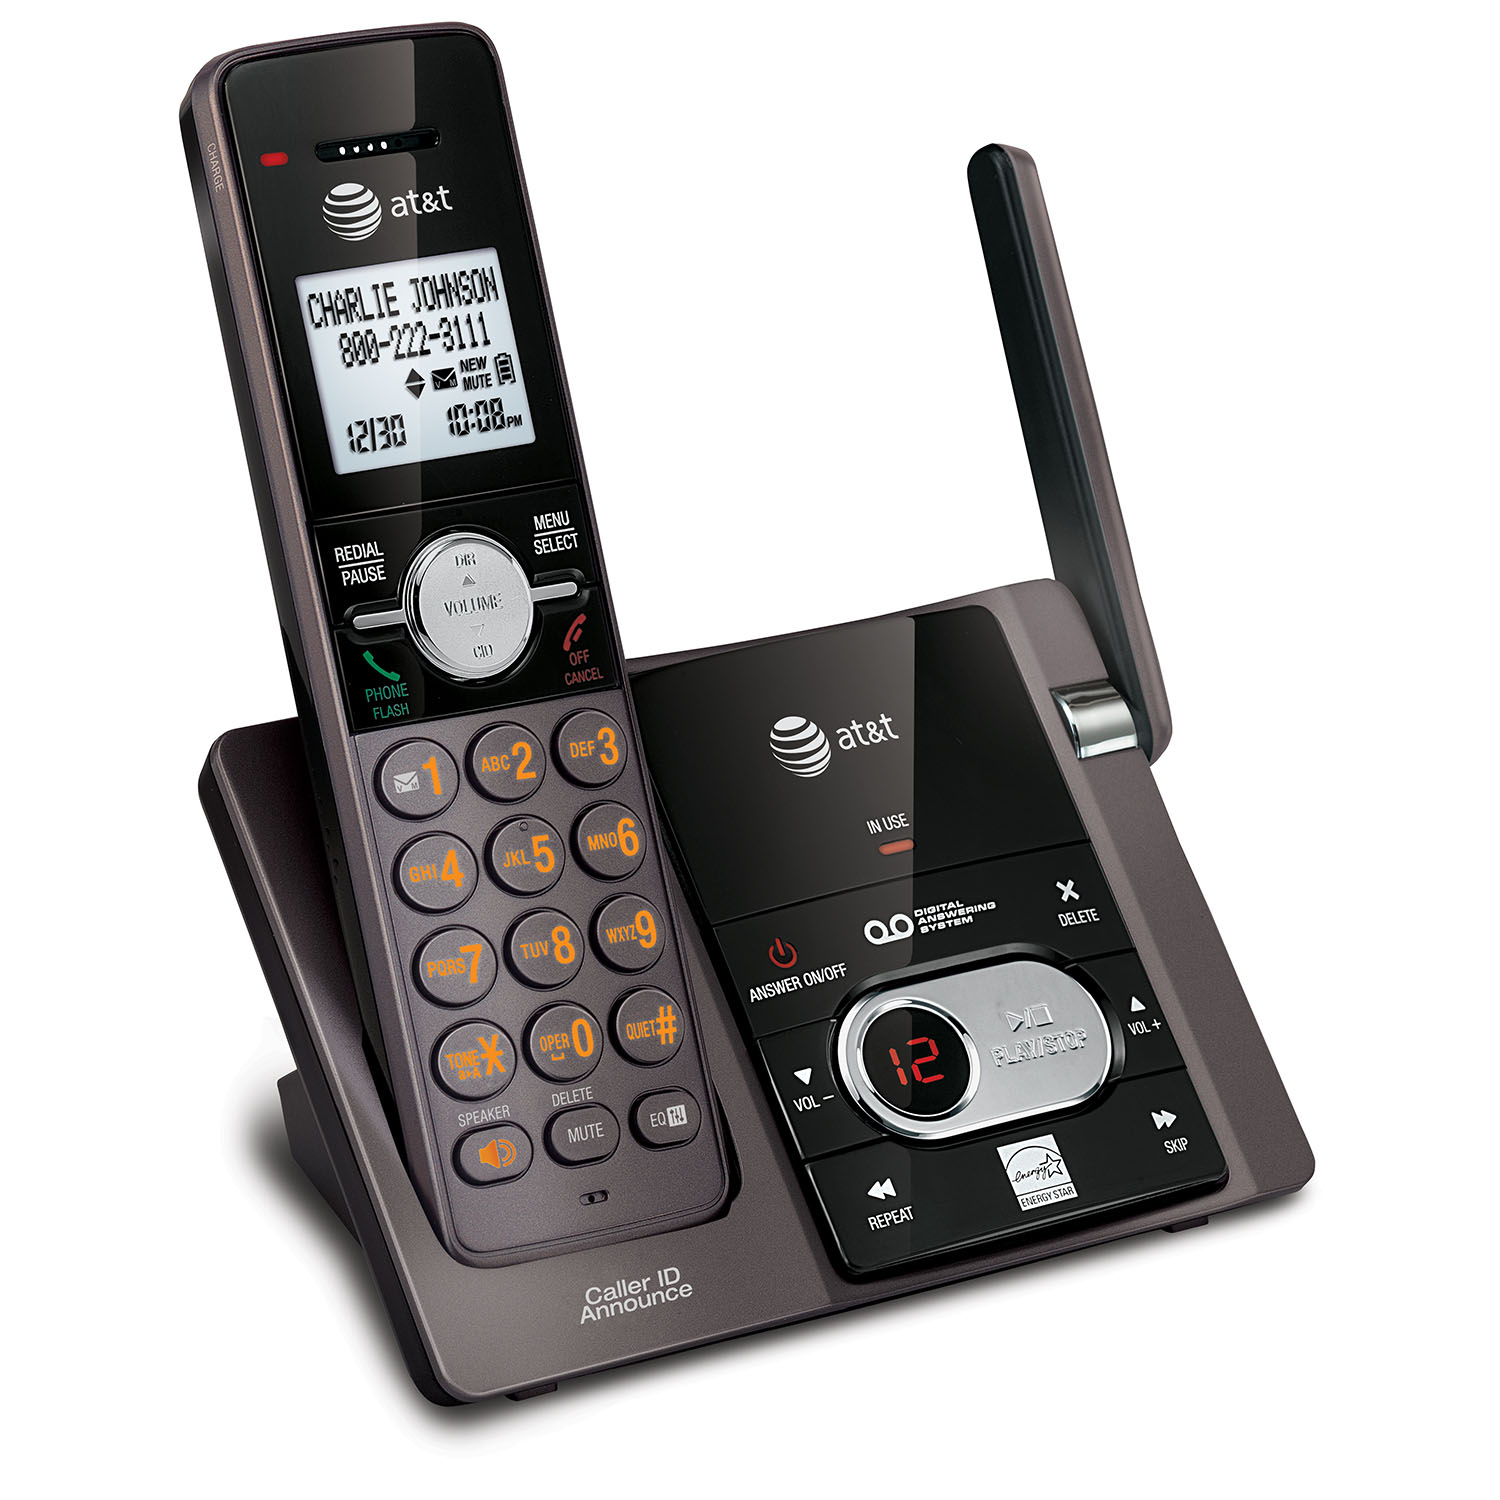 Cordless answering system with caller ID/call waiting - view 2